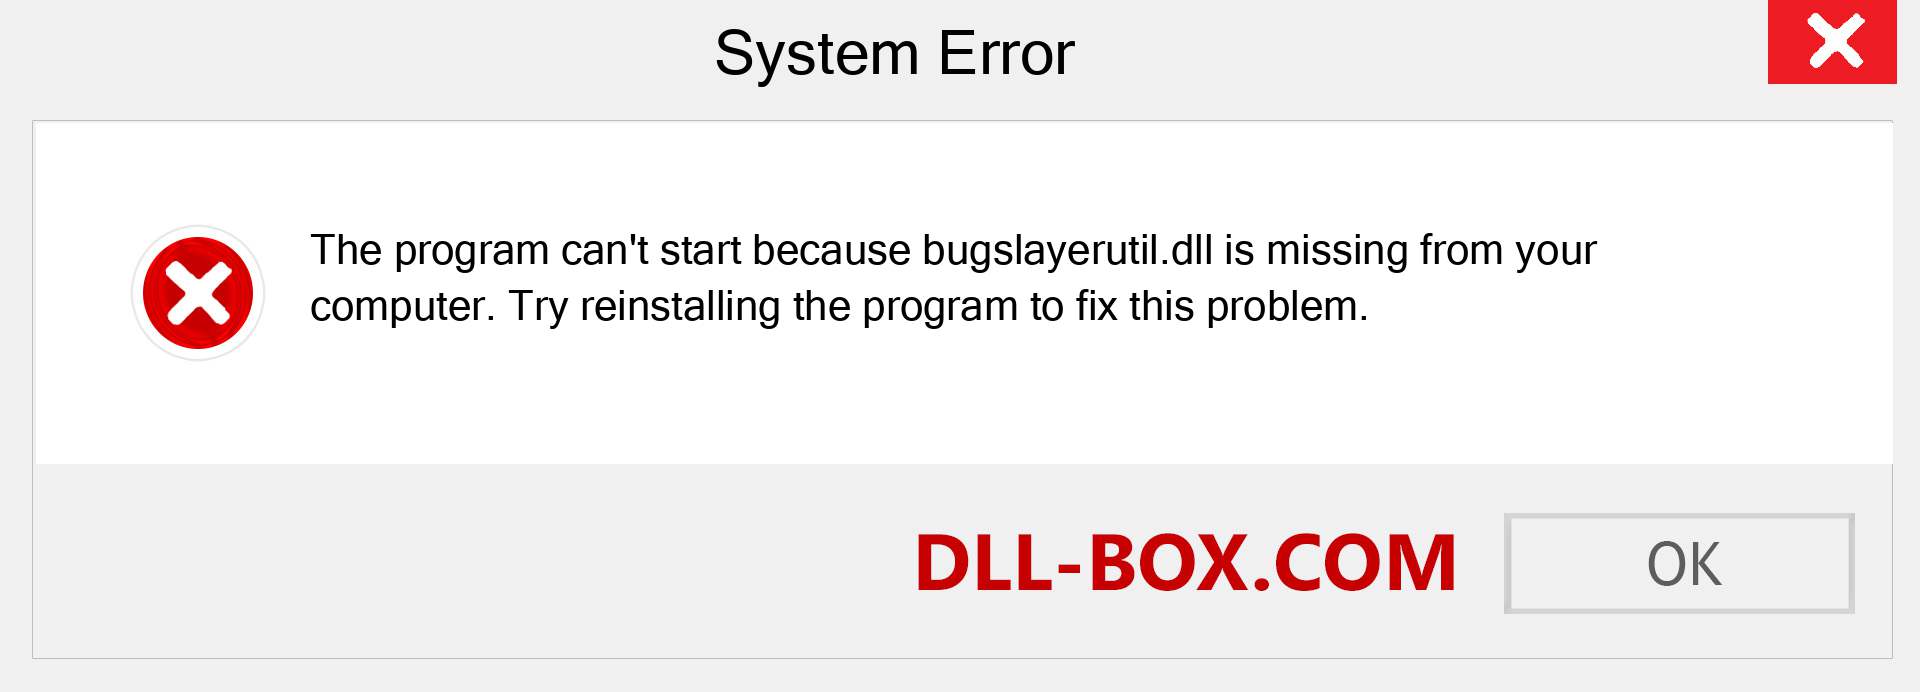  bugslayerutil.dll file is missing?. Download for Windows 7, 8, 10 - Fix  bugslayerutil dll Missing Error on Windows, photos, images